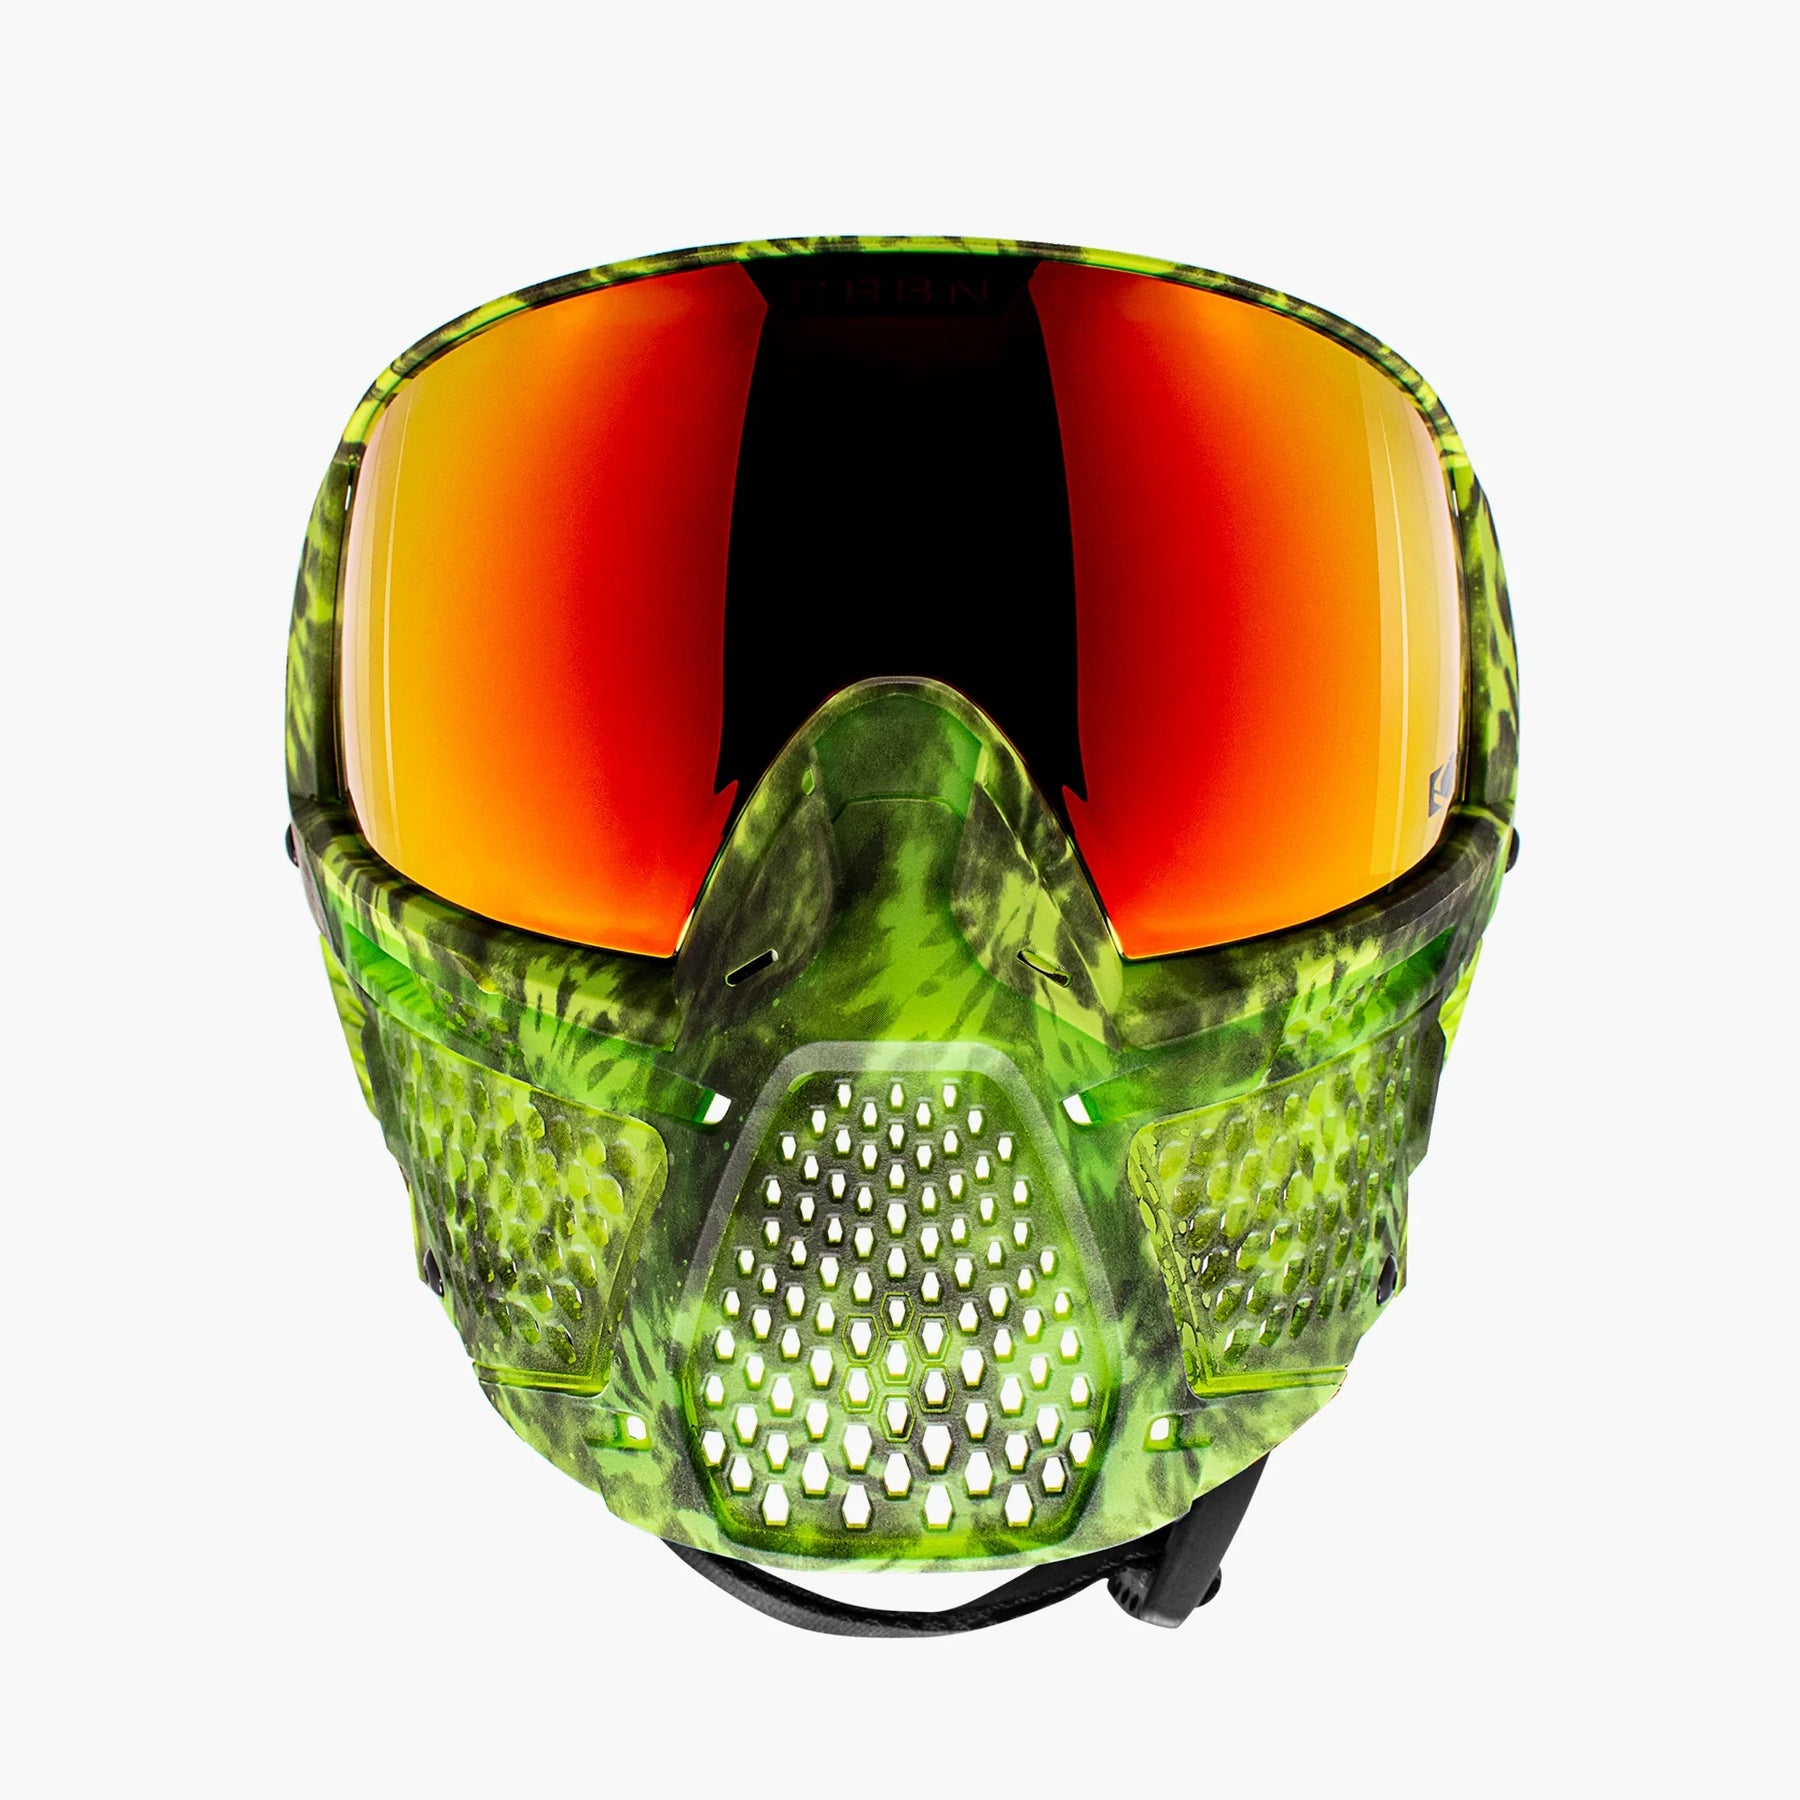 CRBN zero GRX tie dye gecko - Less/More coverage - Paintball Goggles